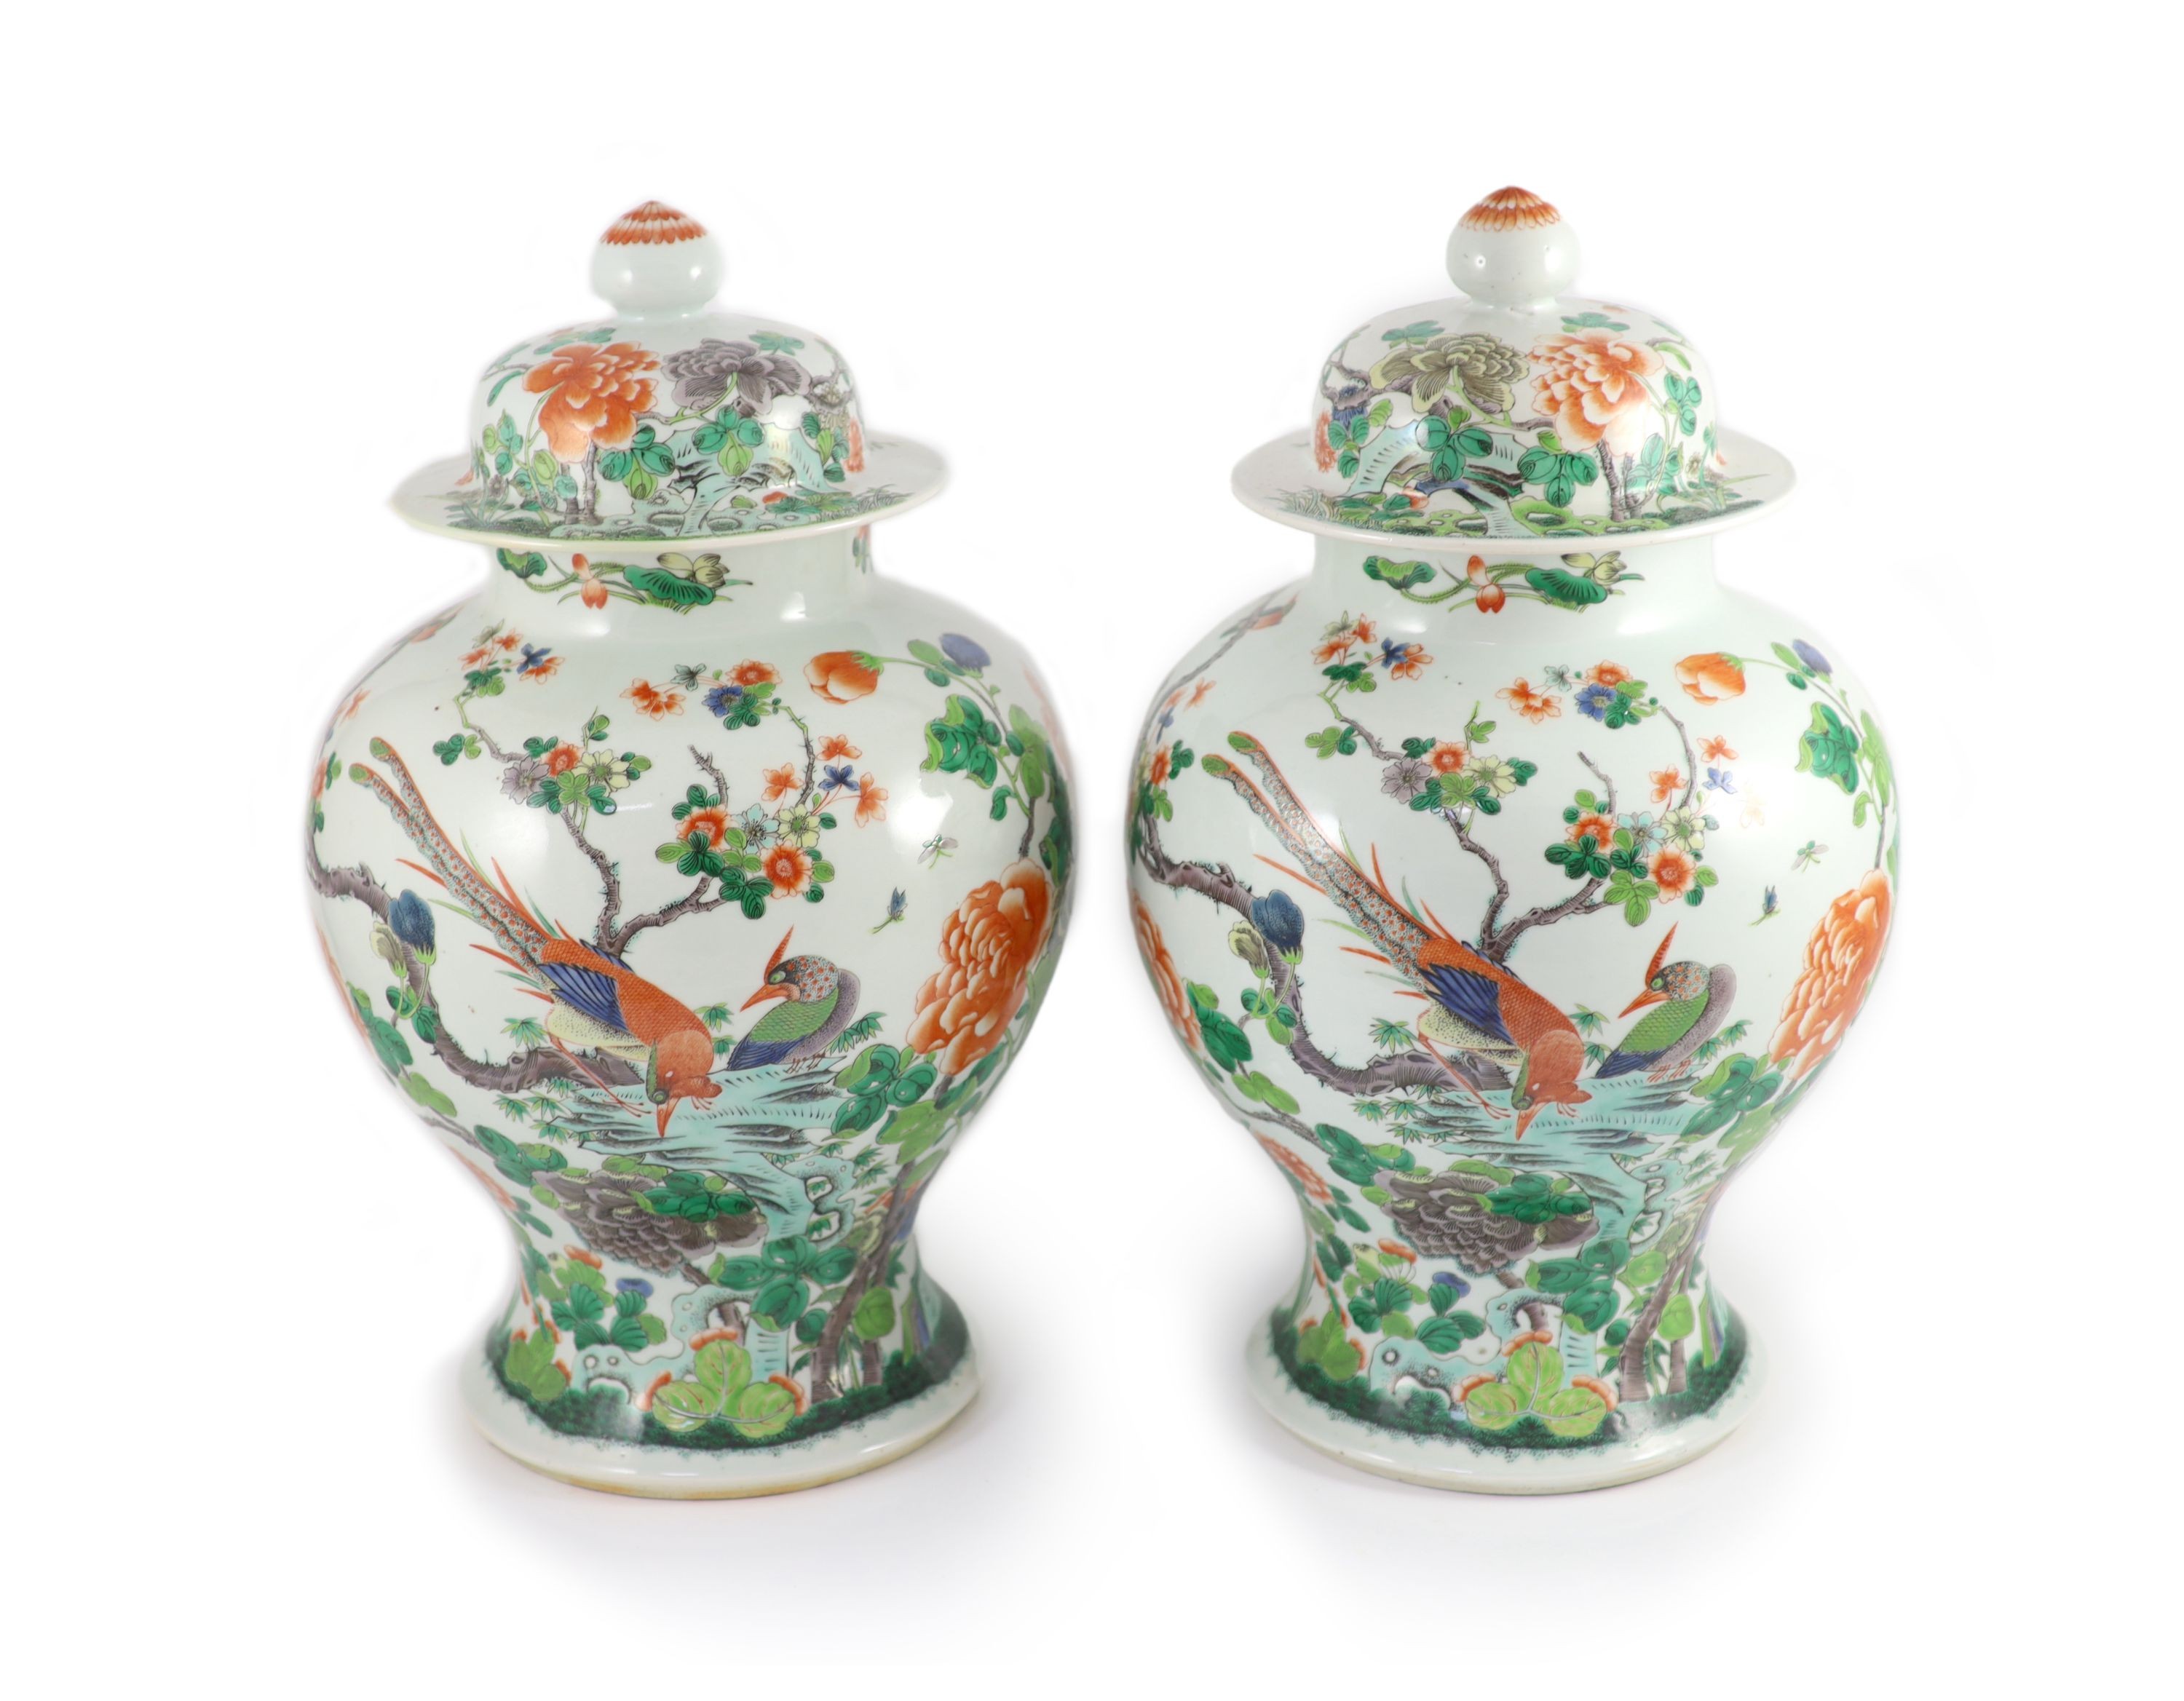 A pair of large Chinese famille verte jars and covers, late 19th century, 45cm high, restoration